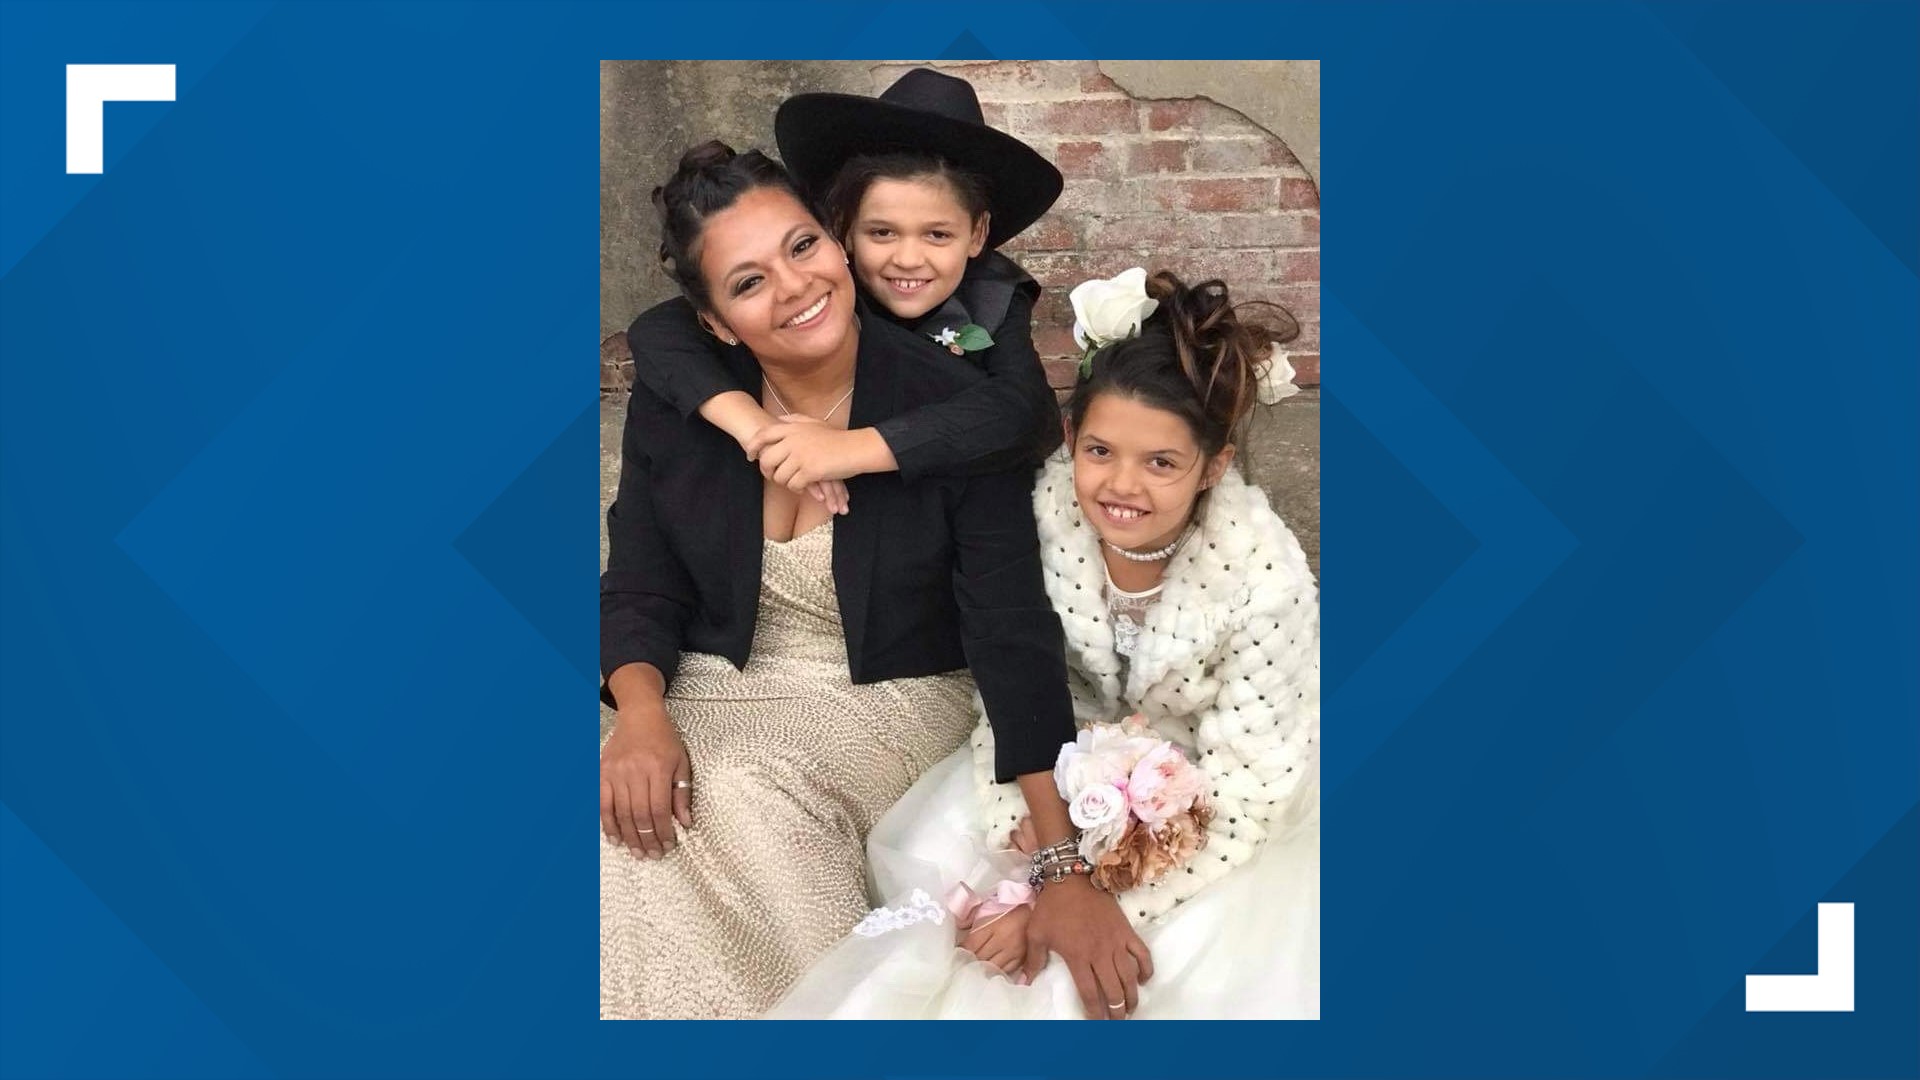 After her car broke down, a water line in her home busted, and her refrigerator went out, Maritza Rincon’s best friend nominated her for a Little Wish.